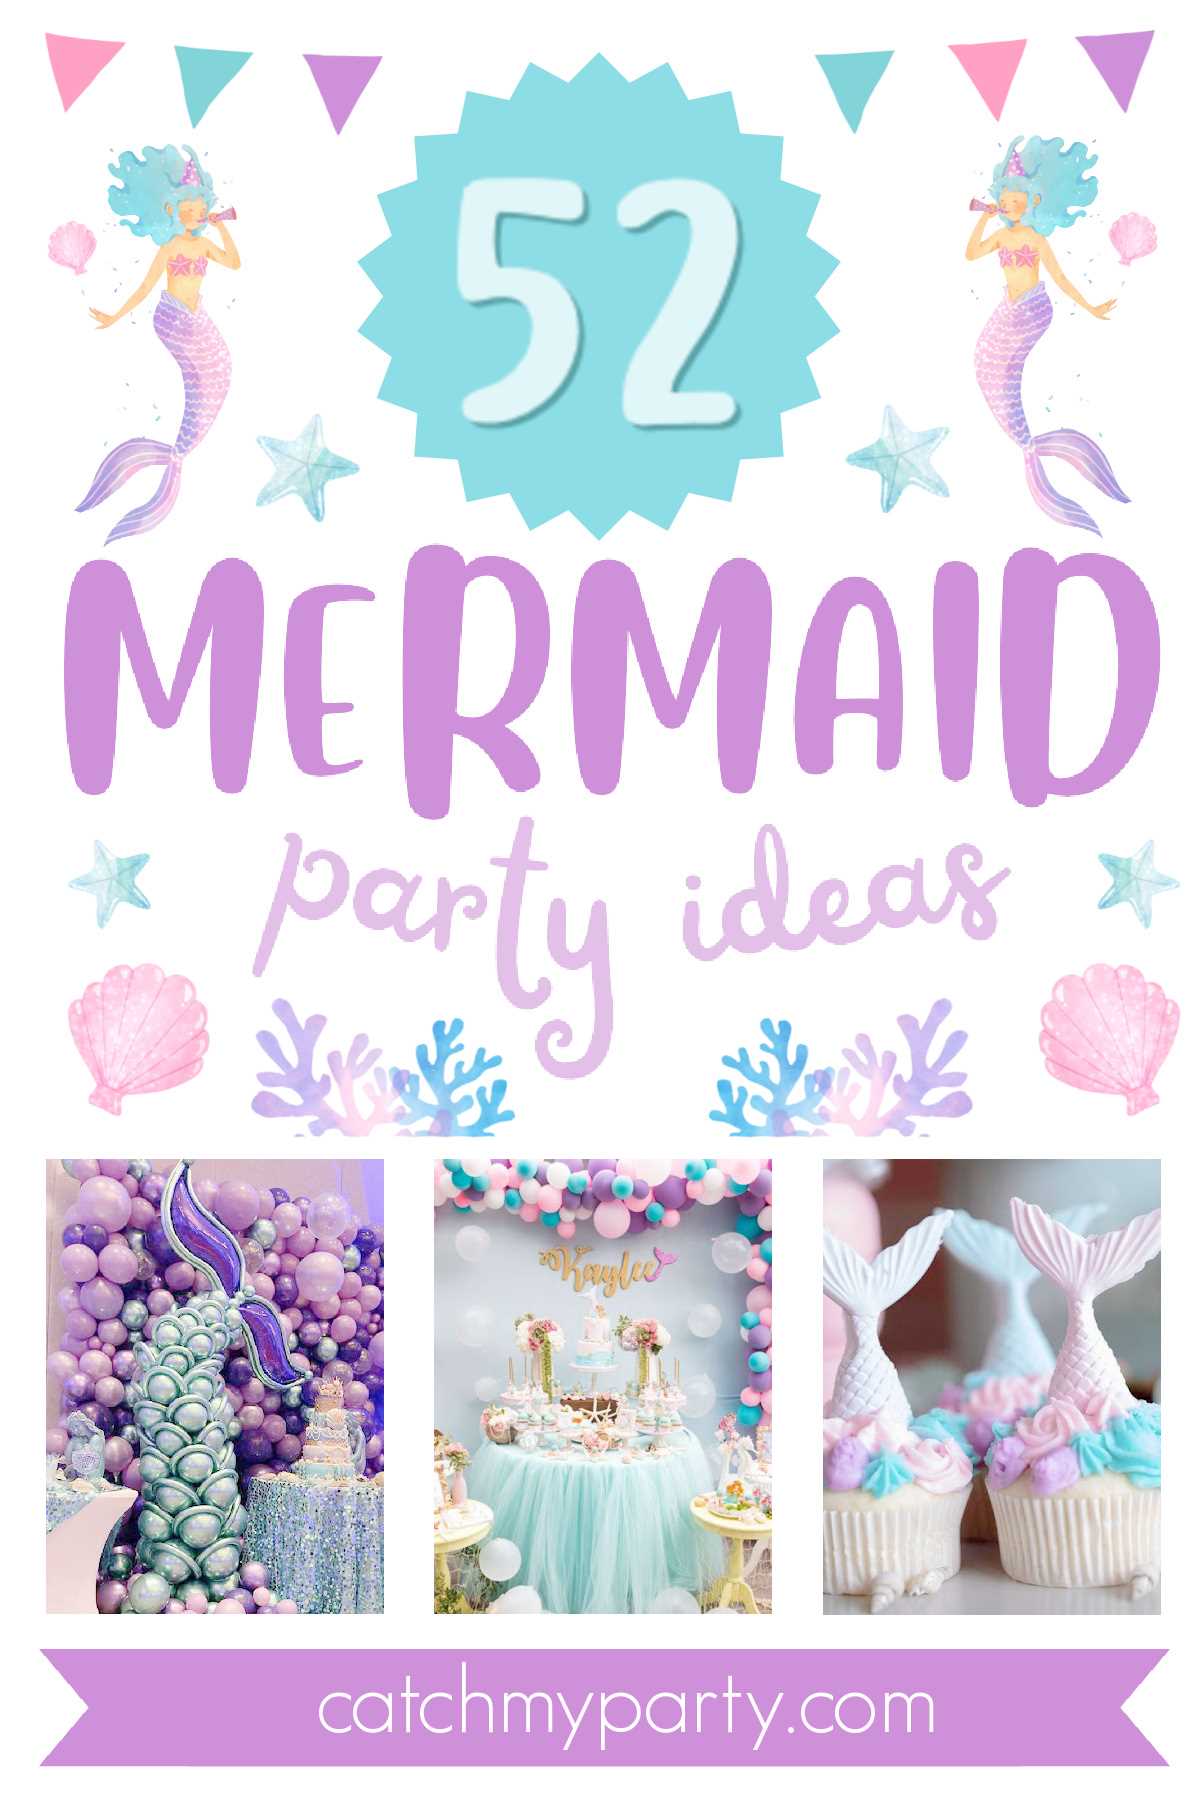 Throw the perfect mermaid birthday party with these tips and ideas